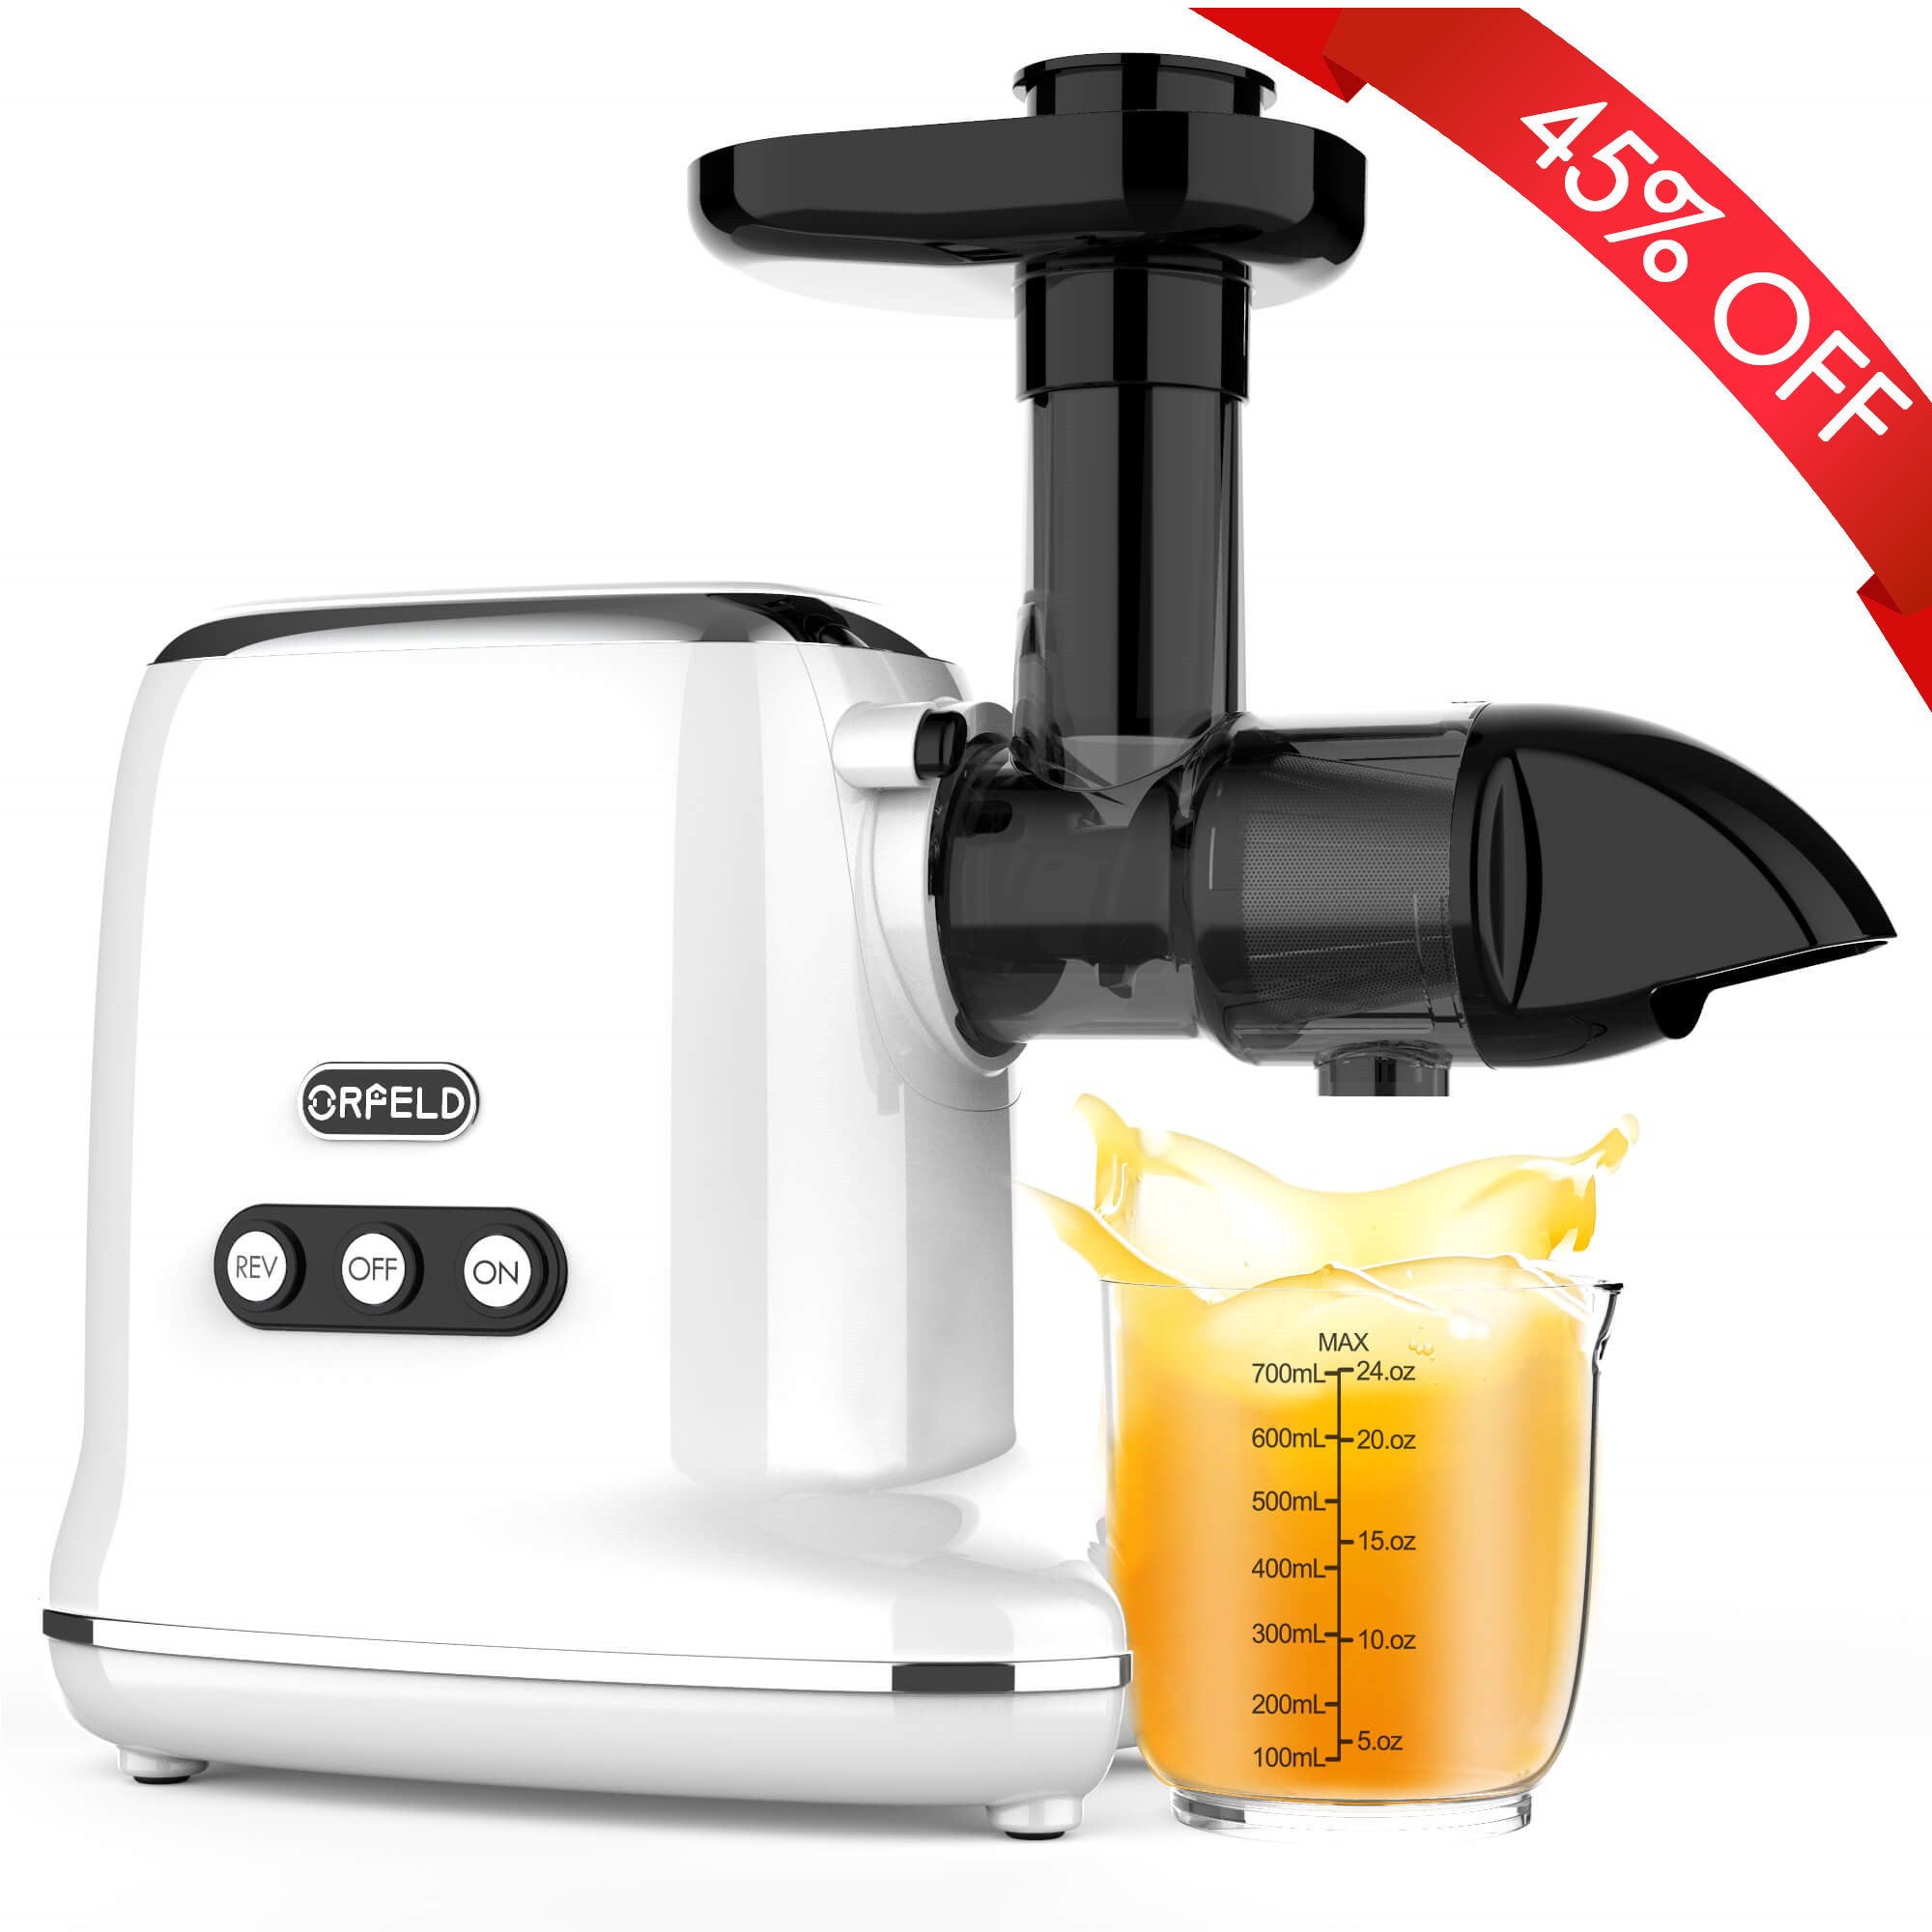 ORFELD Slow Masticating Juicer for Vegetables & Fruits with 90% Juice Yield White